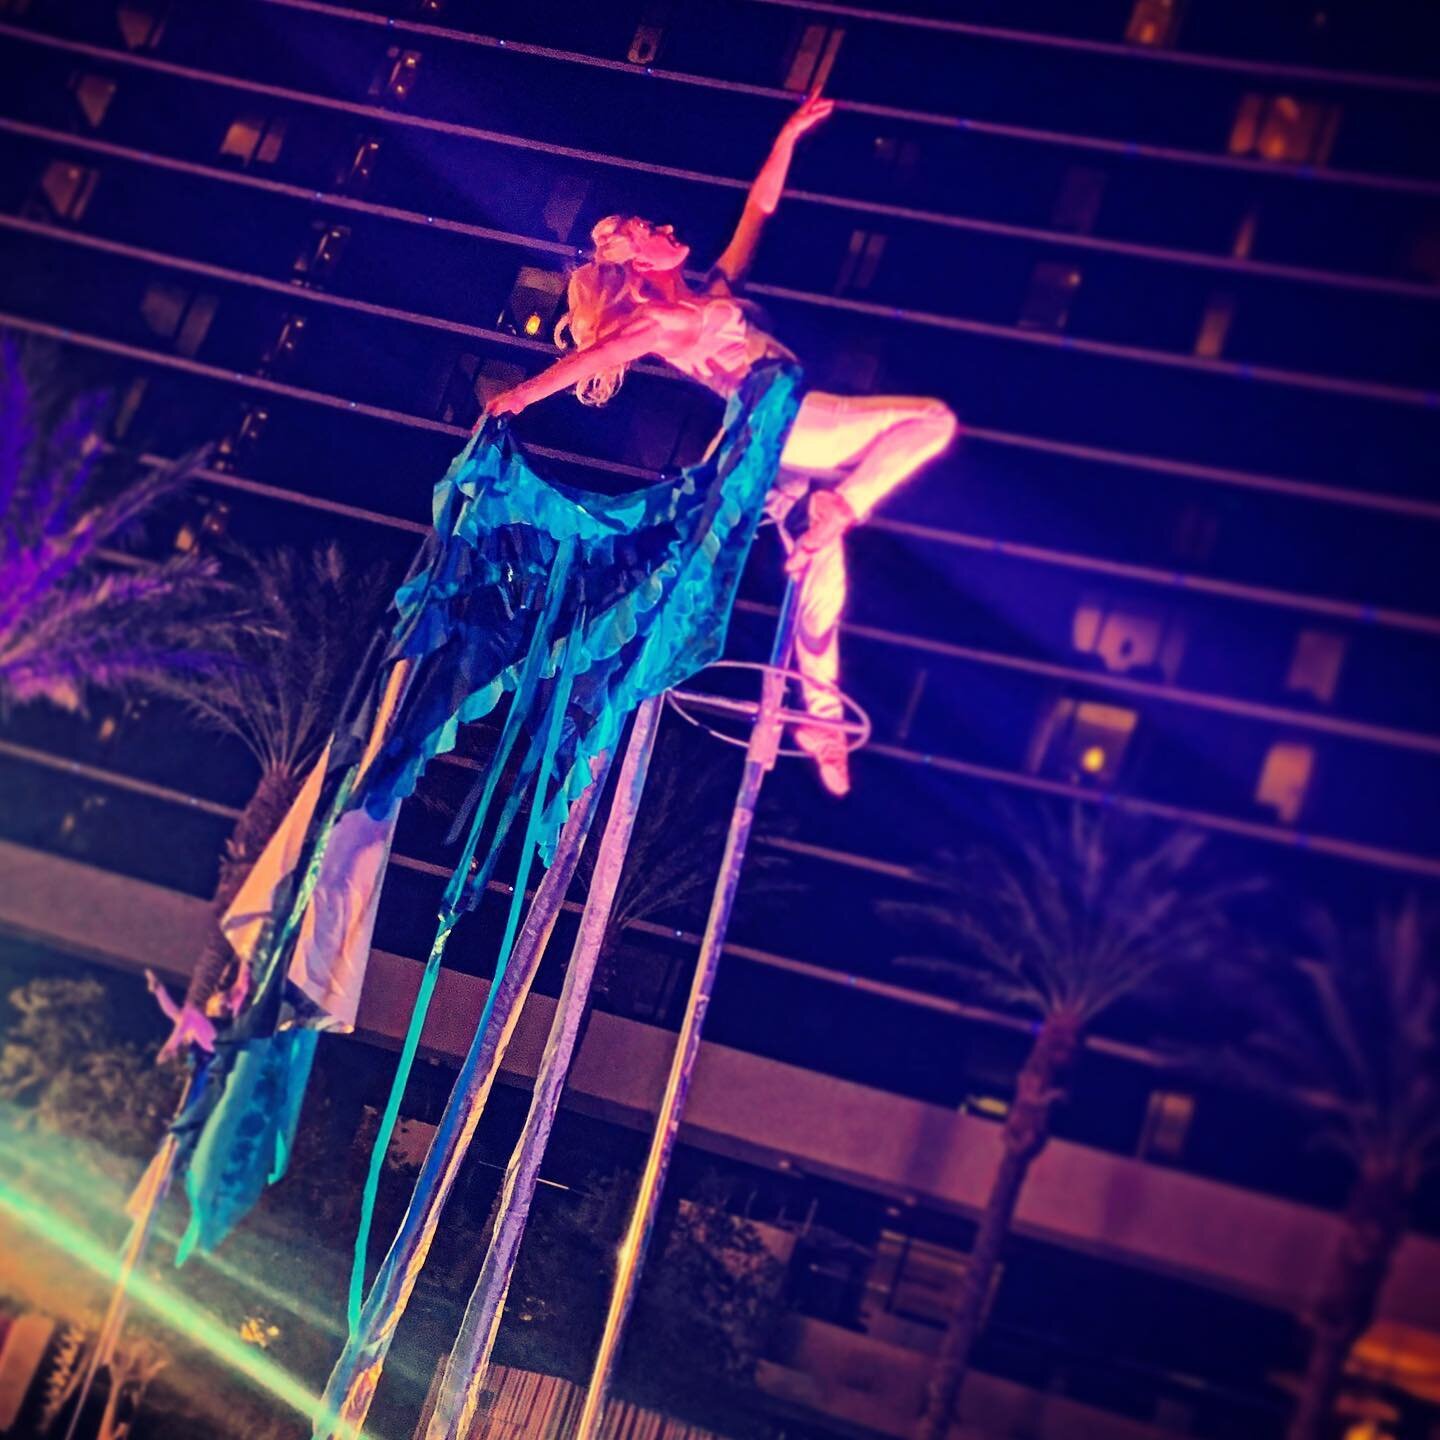 Looking for that wow factor? Something to captivate and activate?
Liquid Sky premieres New SWAY poles! @sway.poles #swaypoles #swaypole #swaypolepros #swaypoleshow #aerialist #circusentertainment #circusacts #eventetertainment #eventprofs #entertainm